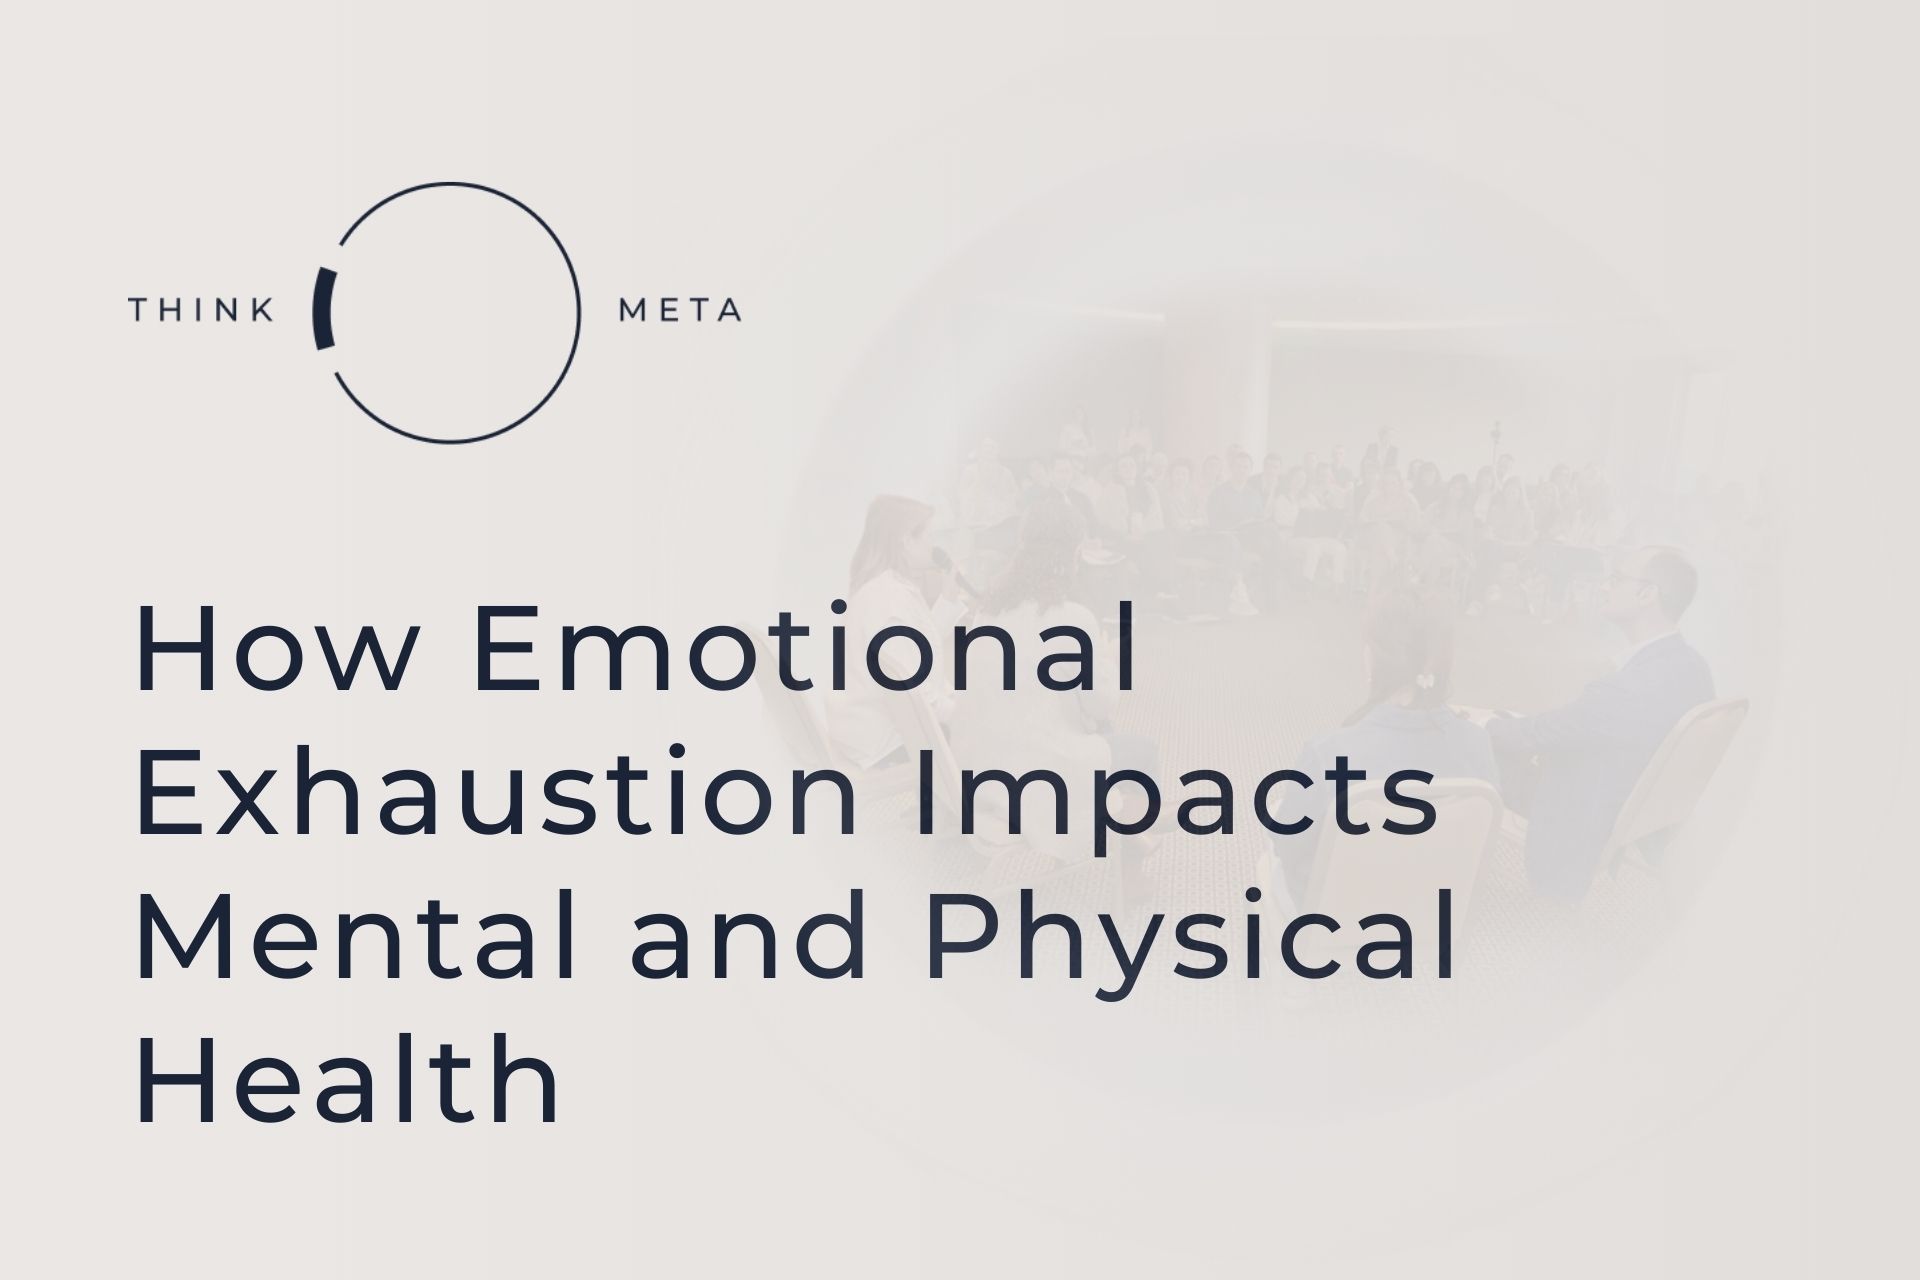 How Emotional Exhaustion Impacts Mental and Physical Health